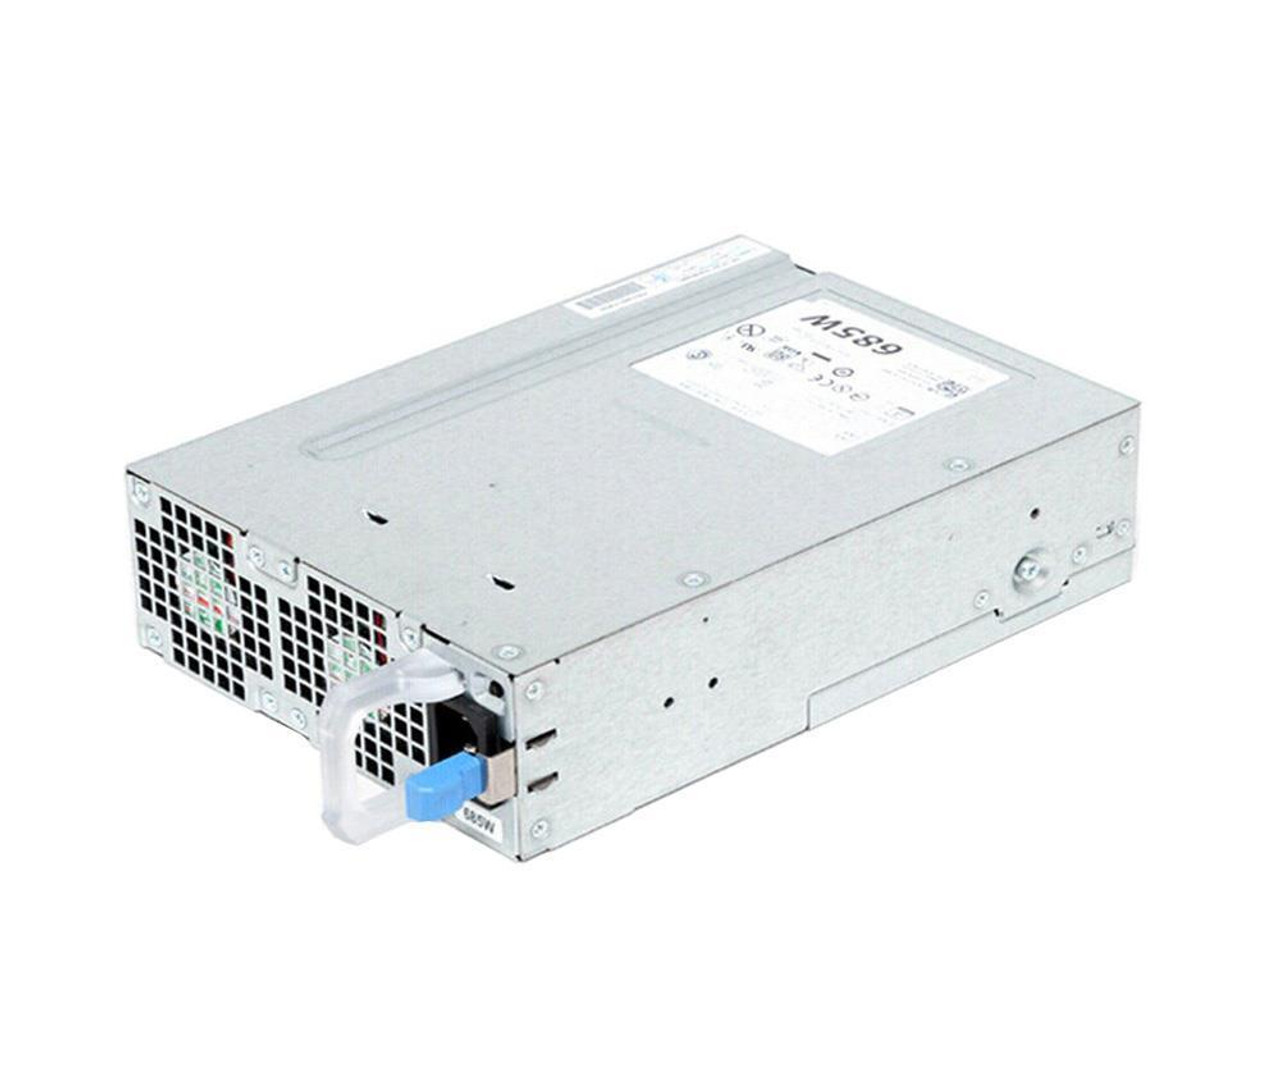 0WPVG2 Dell 685-Watts Power Supply for Precision T3610, T5610